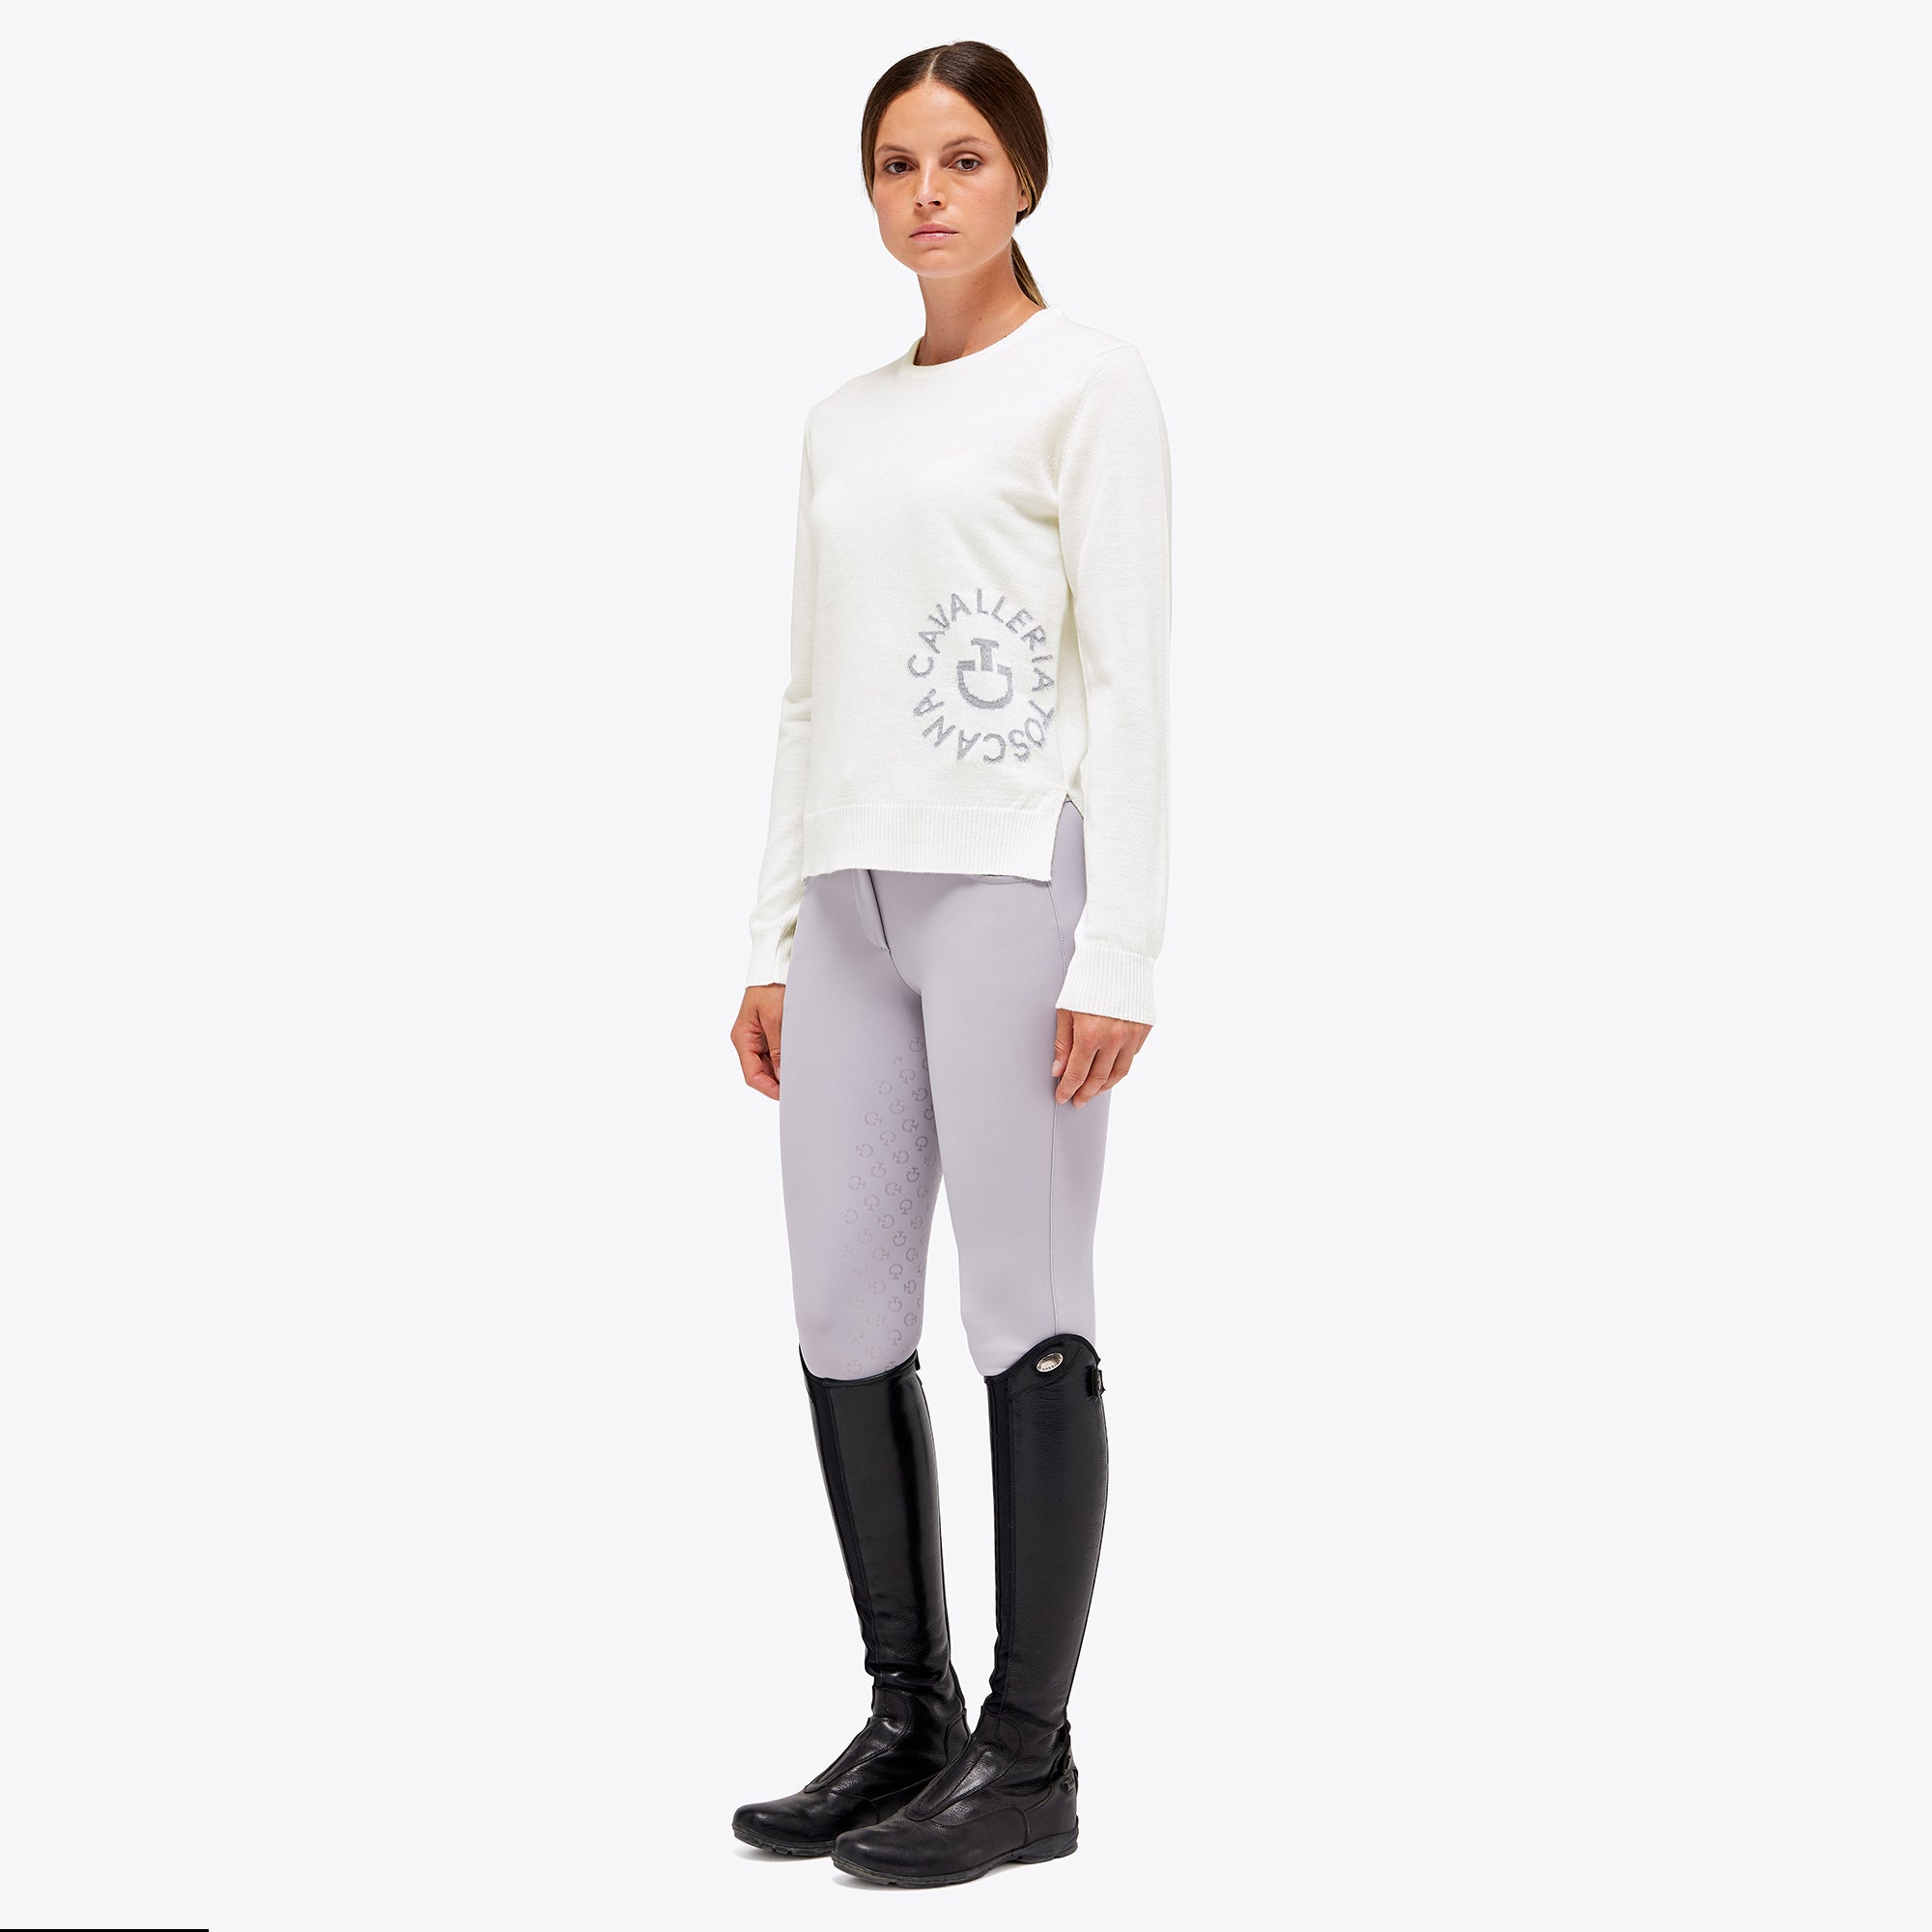 The Cavalleria Toscana Jacquard CT Orbit Marinos Blend Crew Neck Sweater - MAD121-LA040-1B00-OffWhite is a luxurious and stylish sweater made in Italy from high-quality materials. This sweater is made of a mixture of merino wool and cotton, which makes it a soft, breathable and comfortable garment.